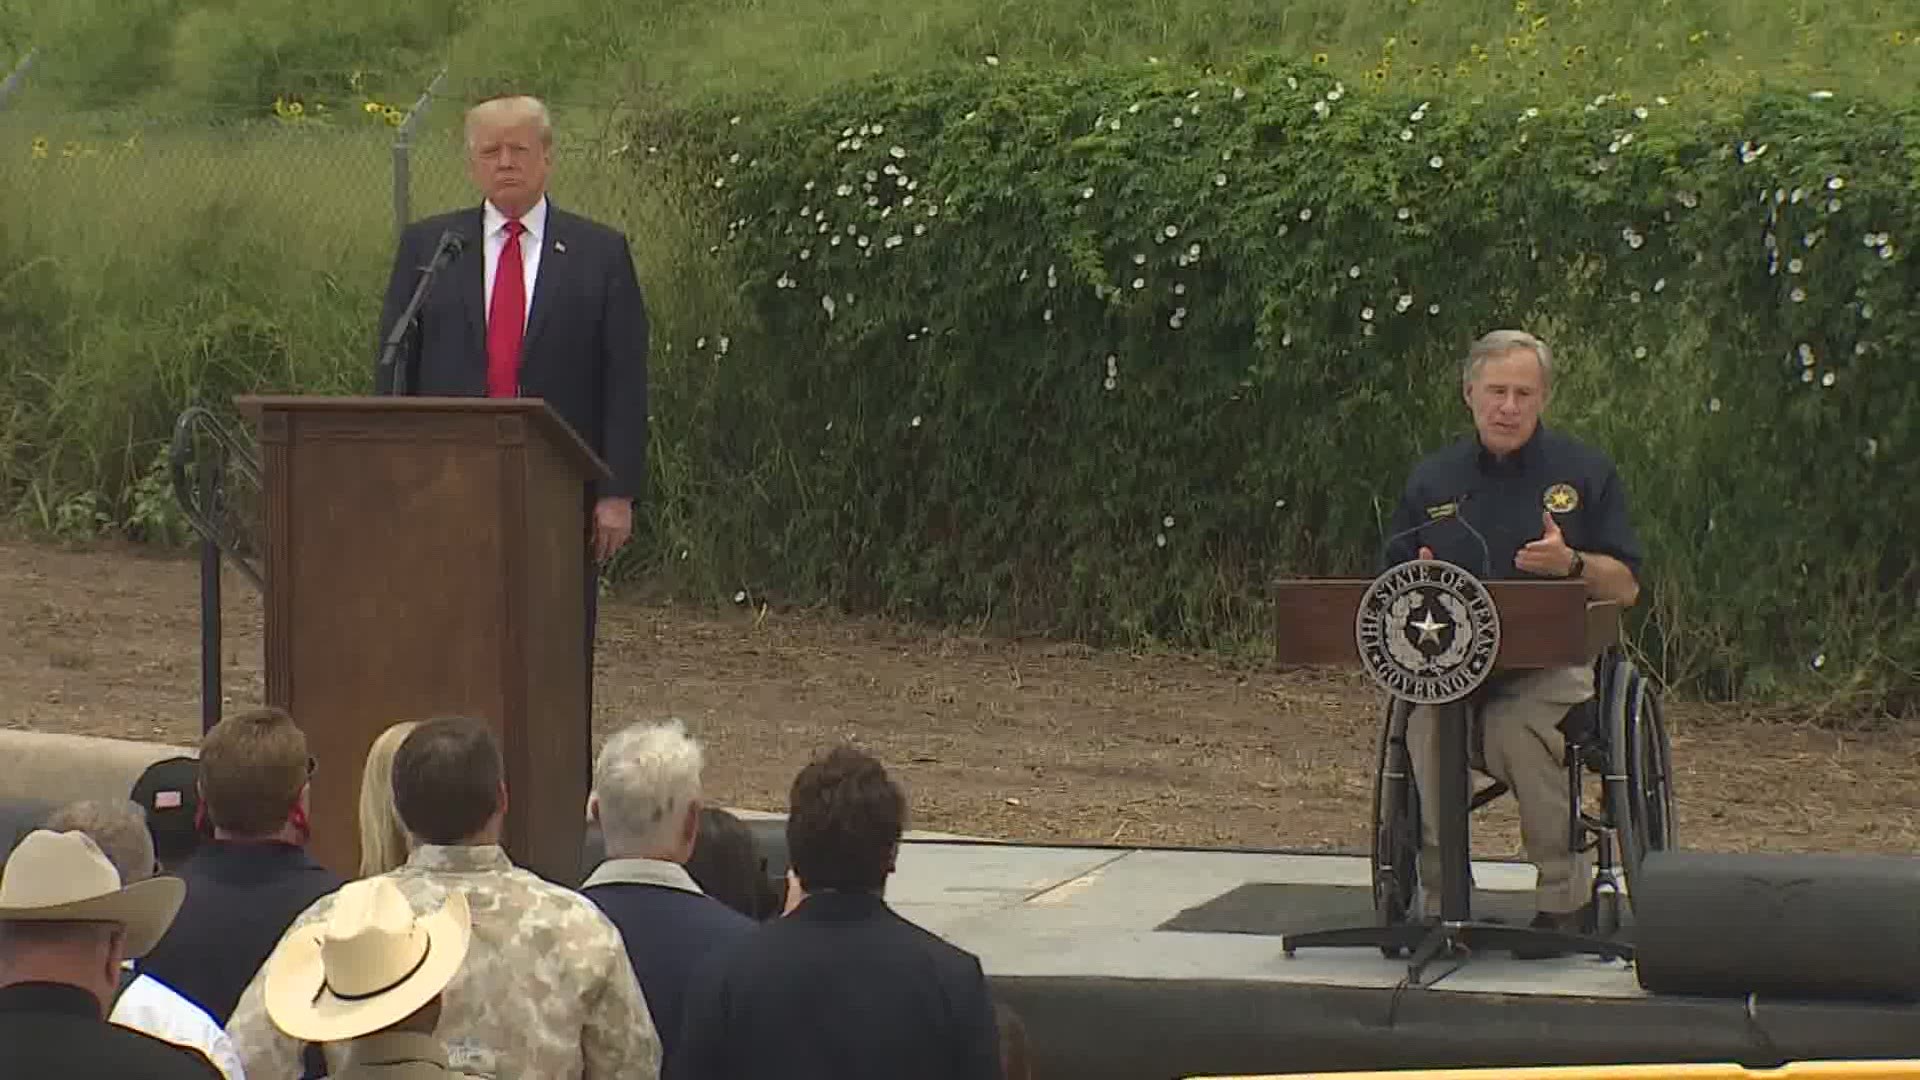 Gov. Greg Abbott and former President Donald Trump traveled to Pharr, Texas to tour the unfinished border wall.